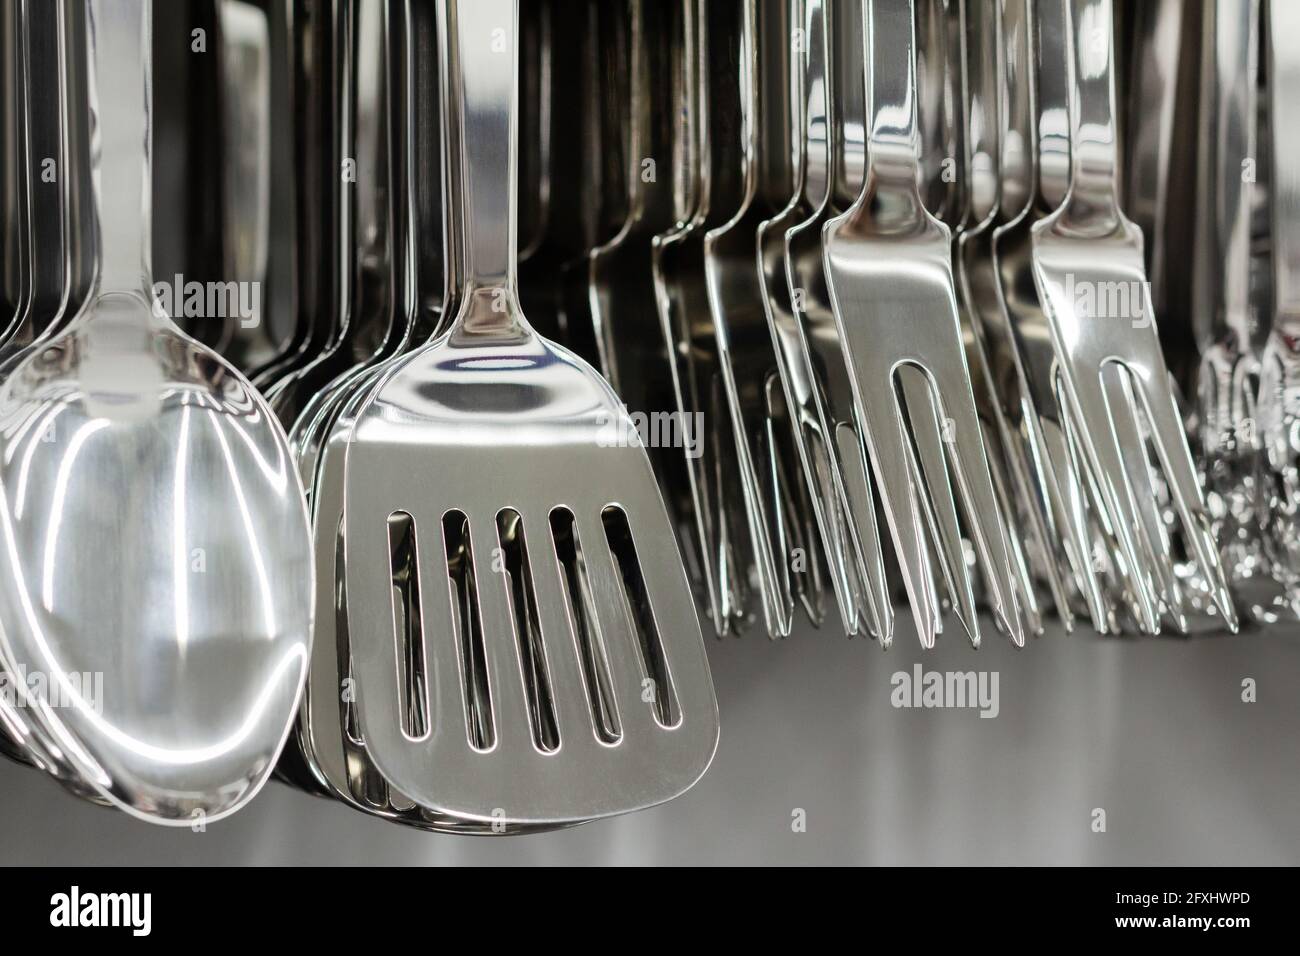 Kitchen Utensils For Sale High Resolution Stock Photography And Images Alamy